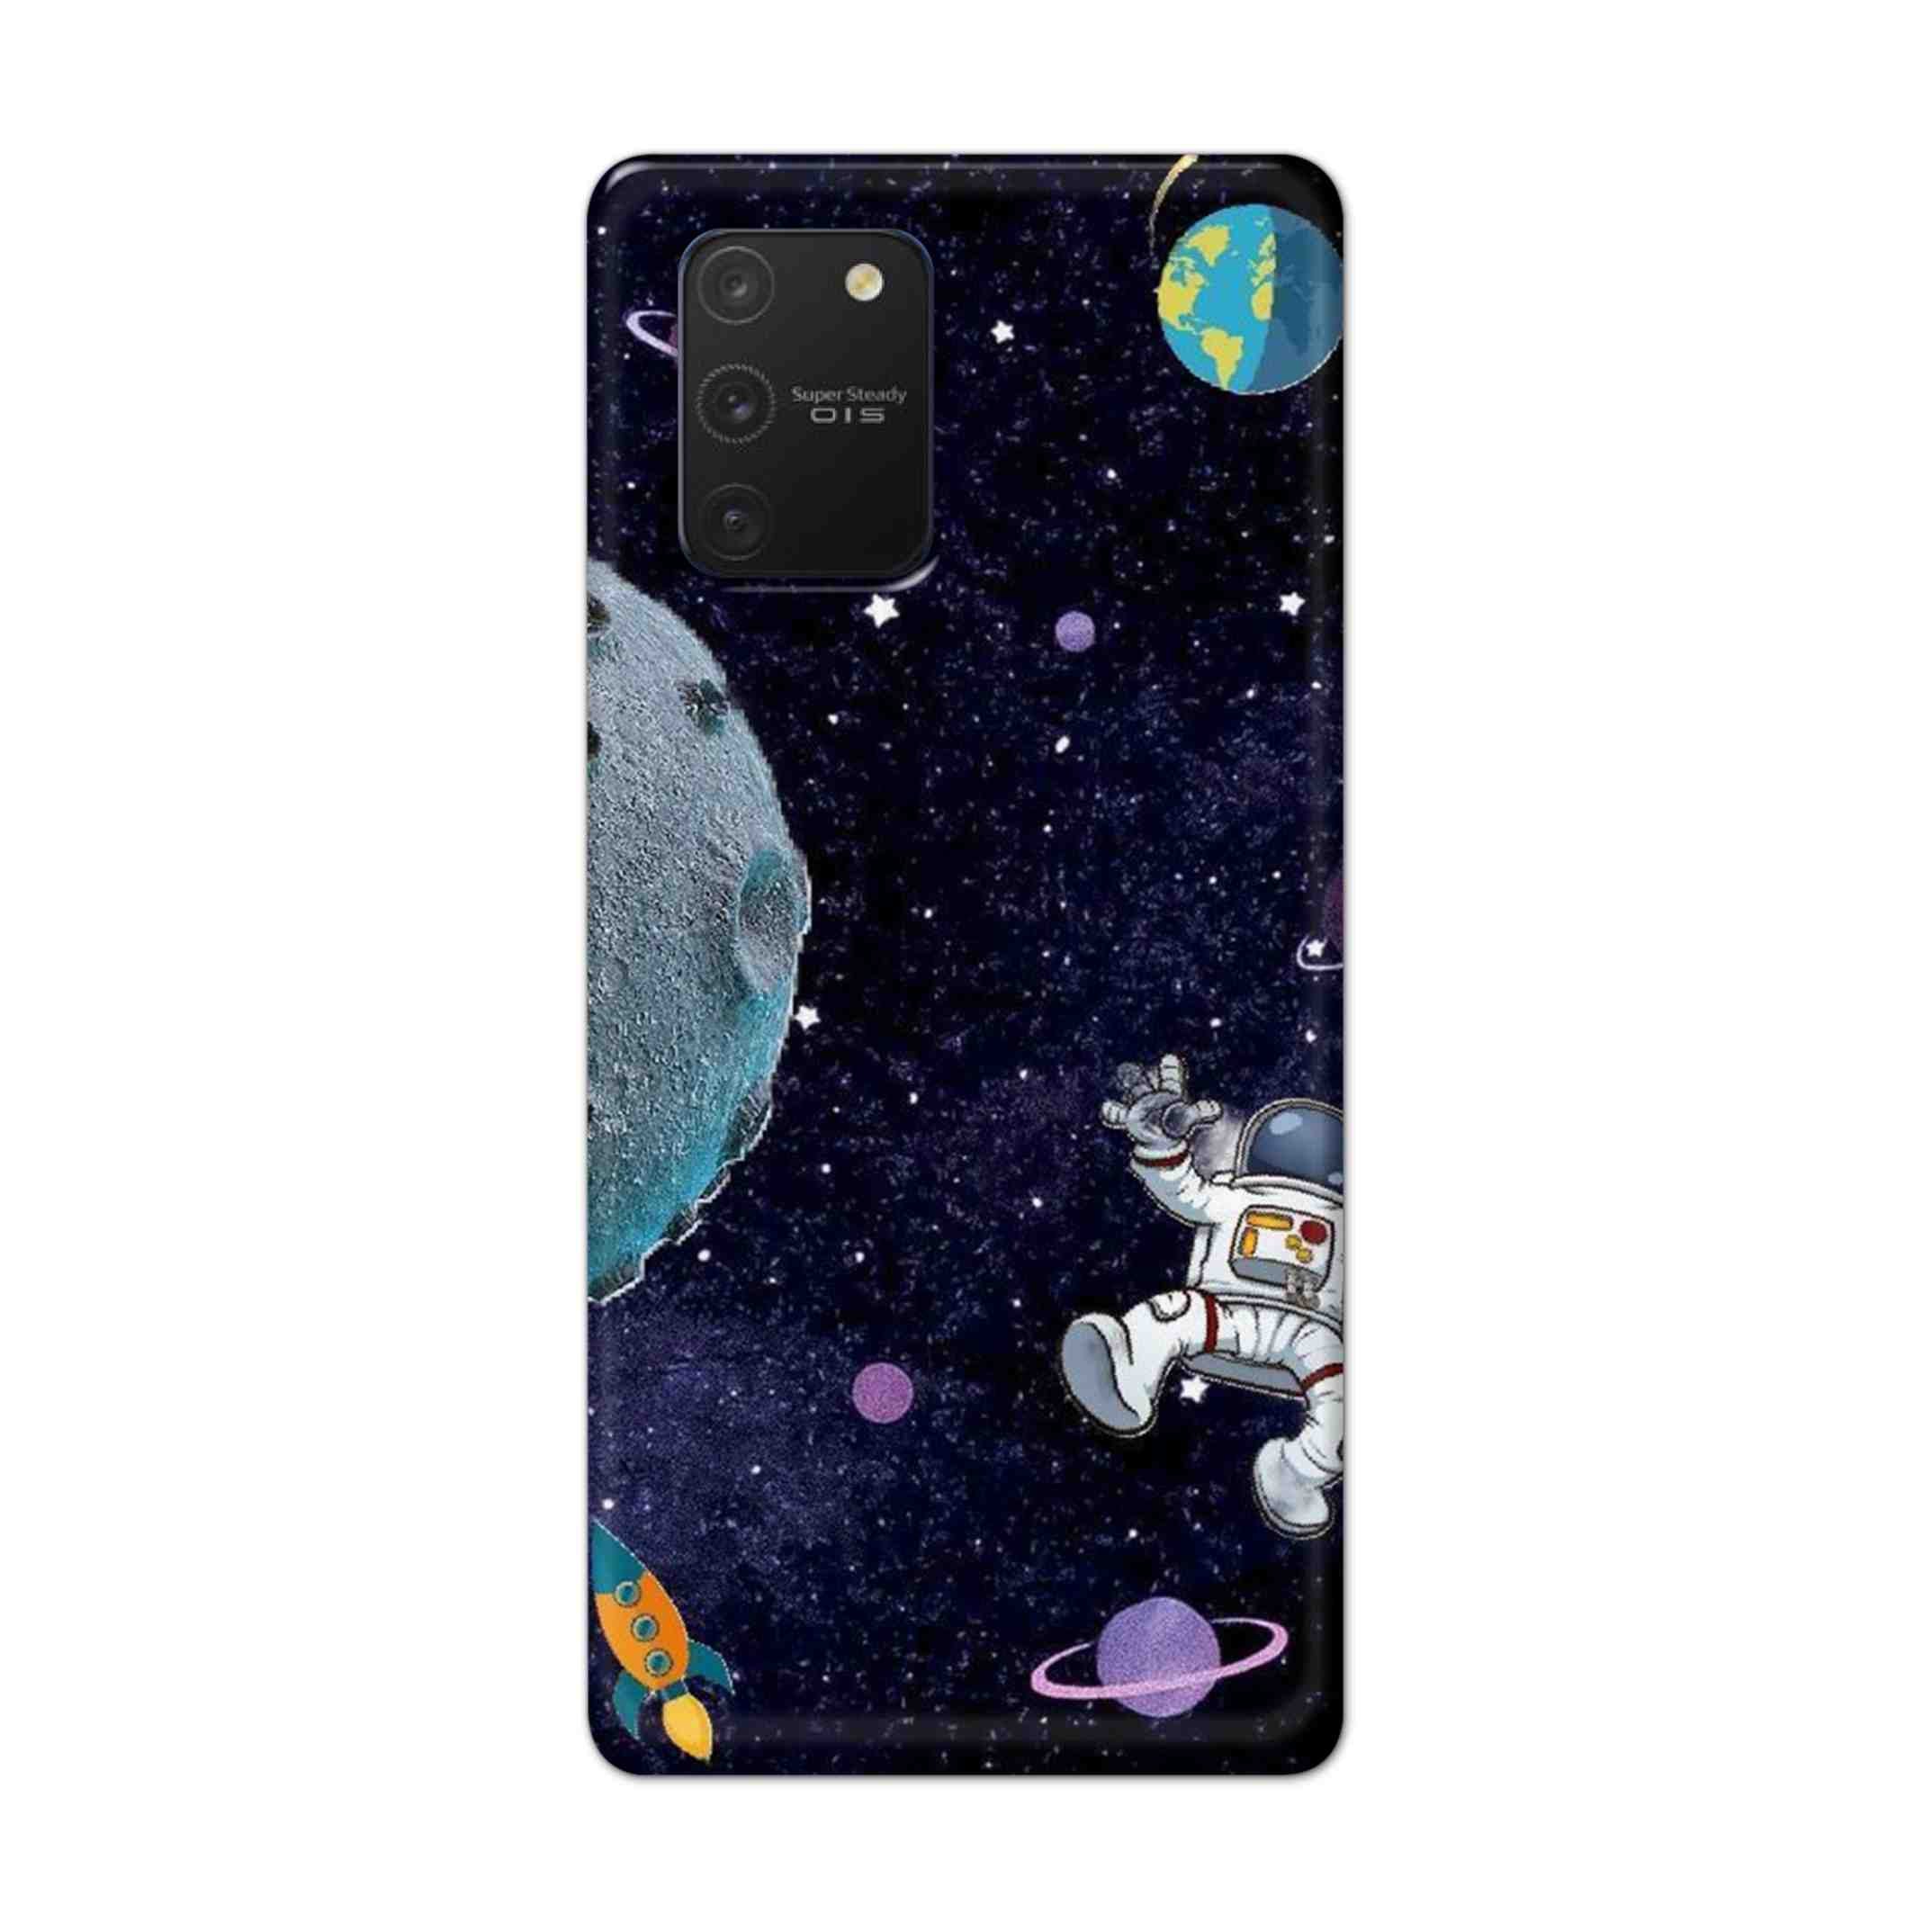 Buy Space Hard Back Mobile Phone Case Cover For Samsung Galaxy S10 Lite Online